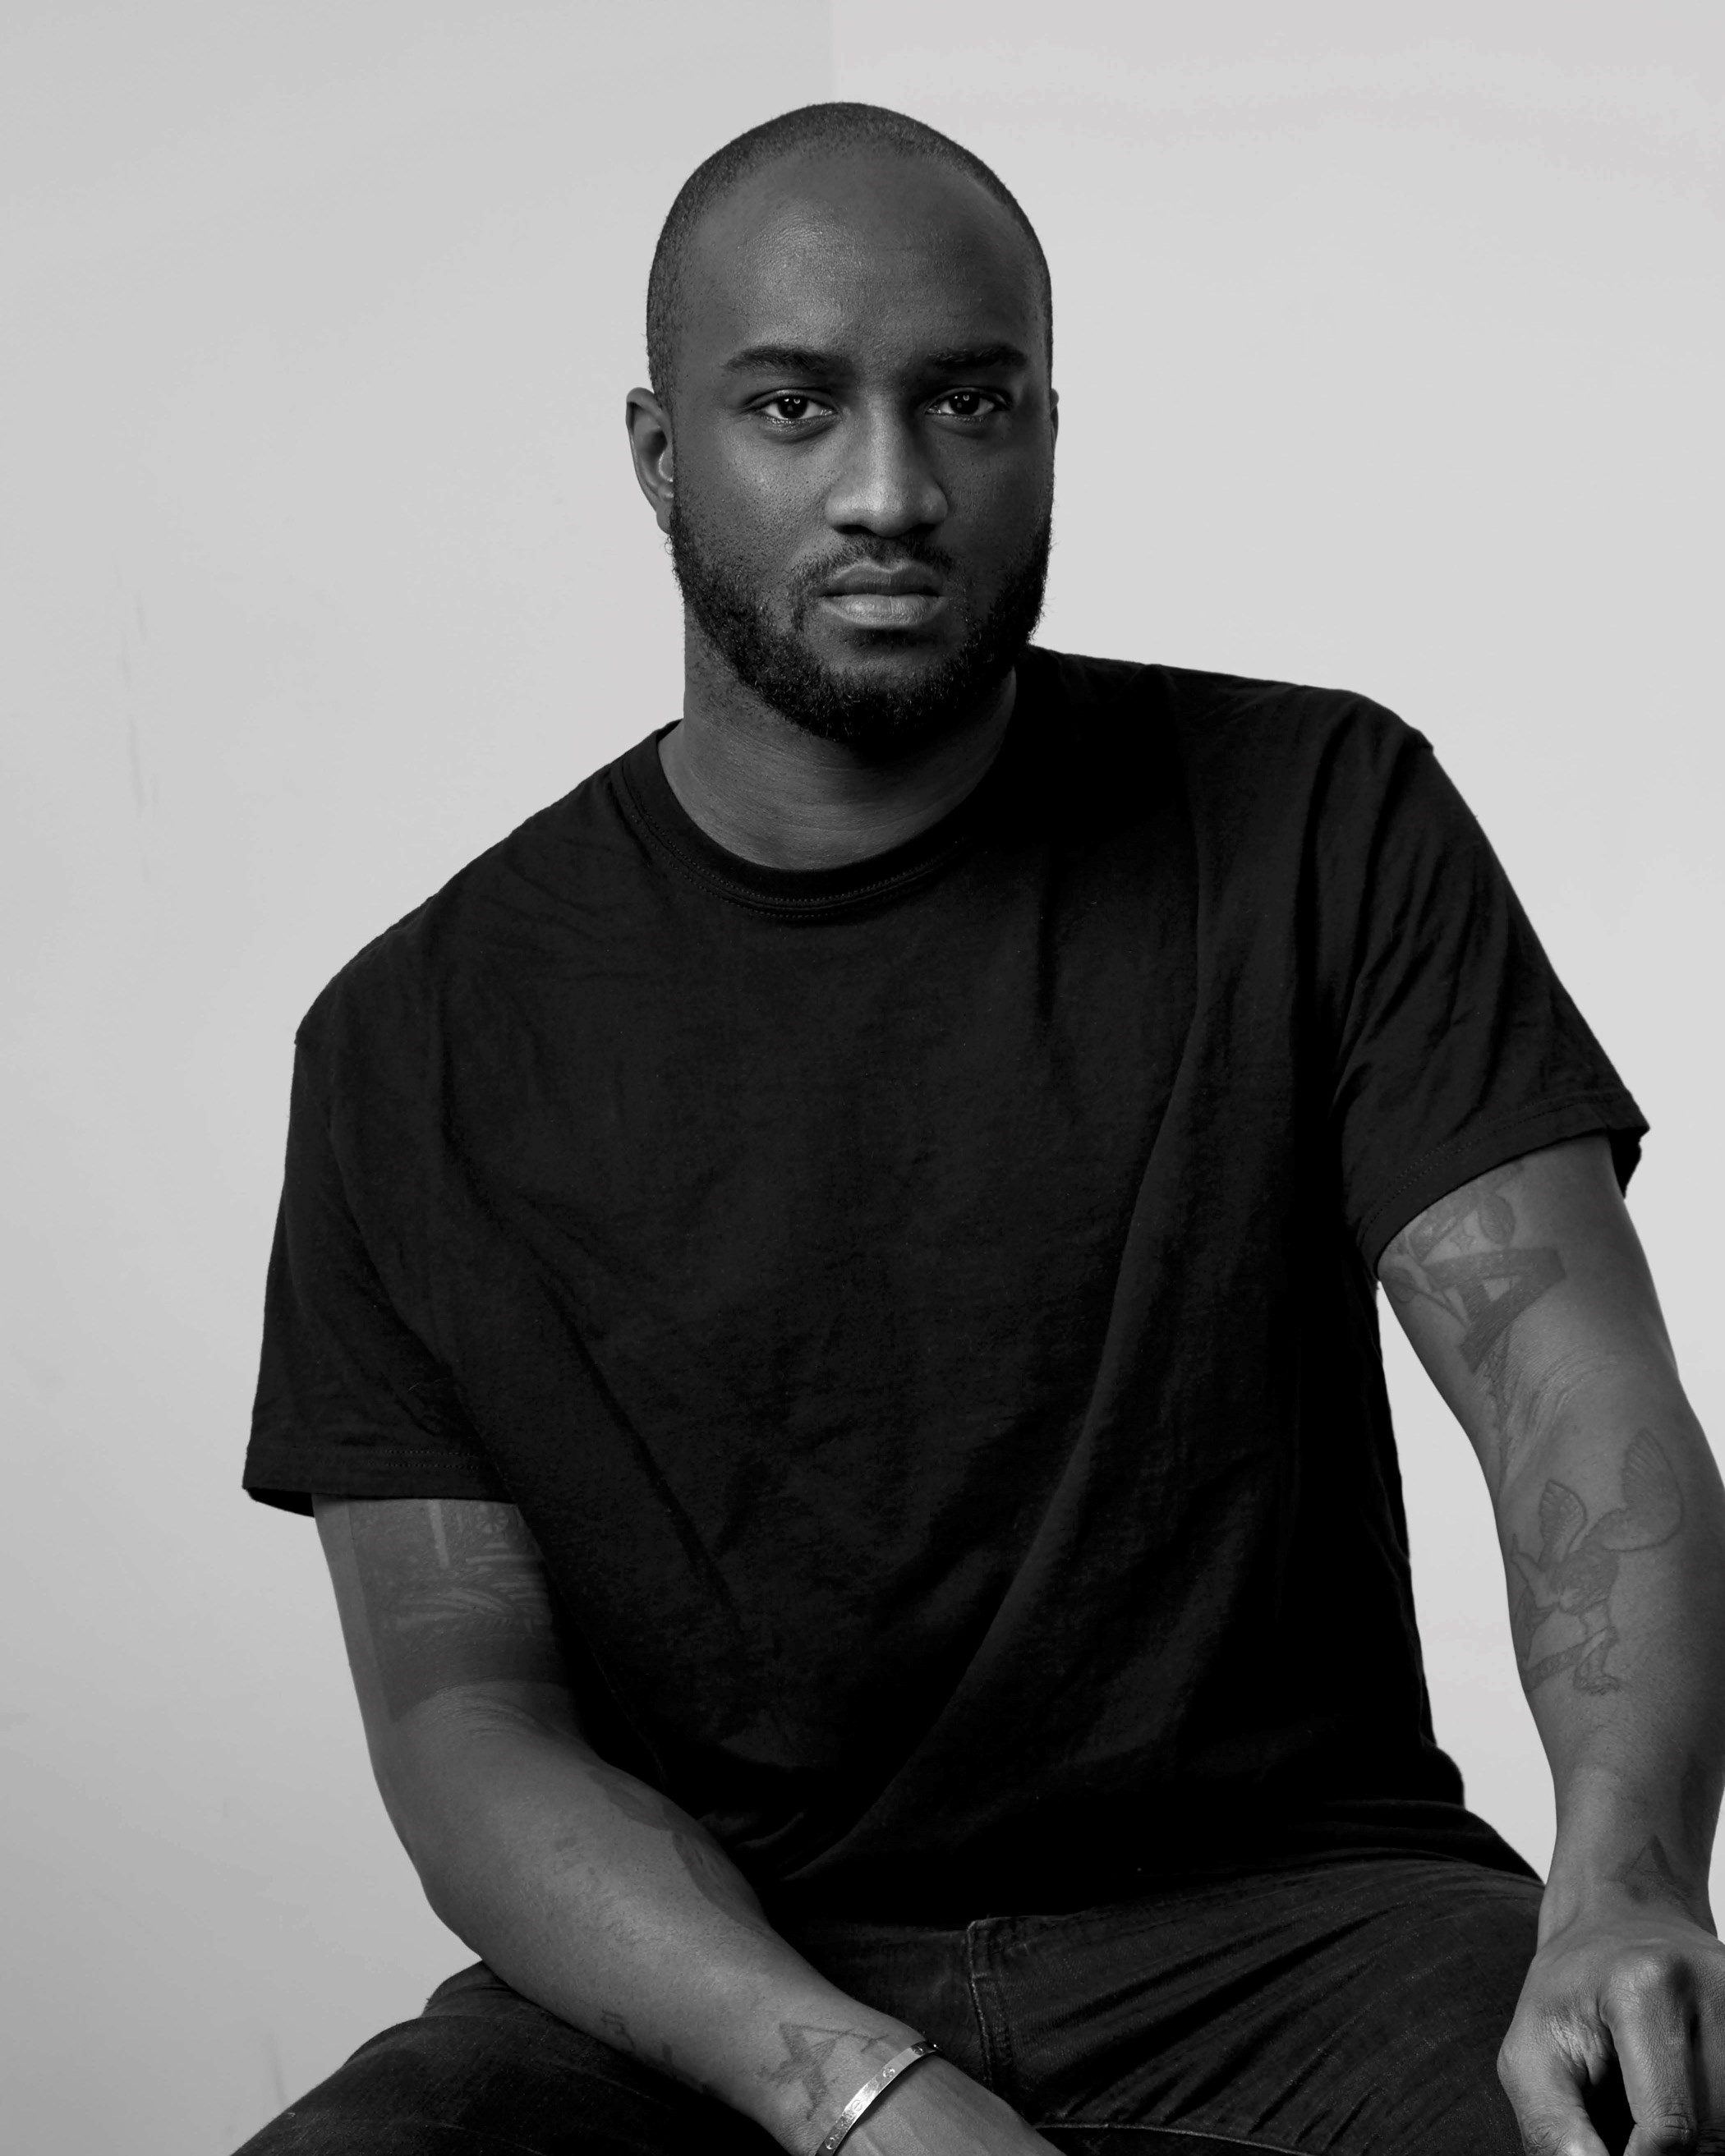 Virgil Abloh fashion designer known for work with Louis Vuitton dies at  41  Good Morning America